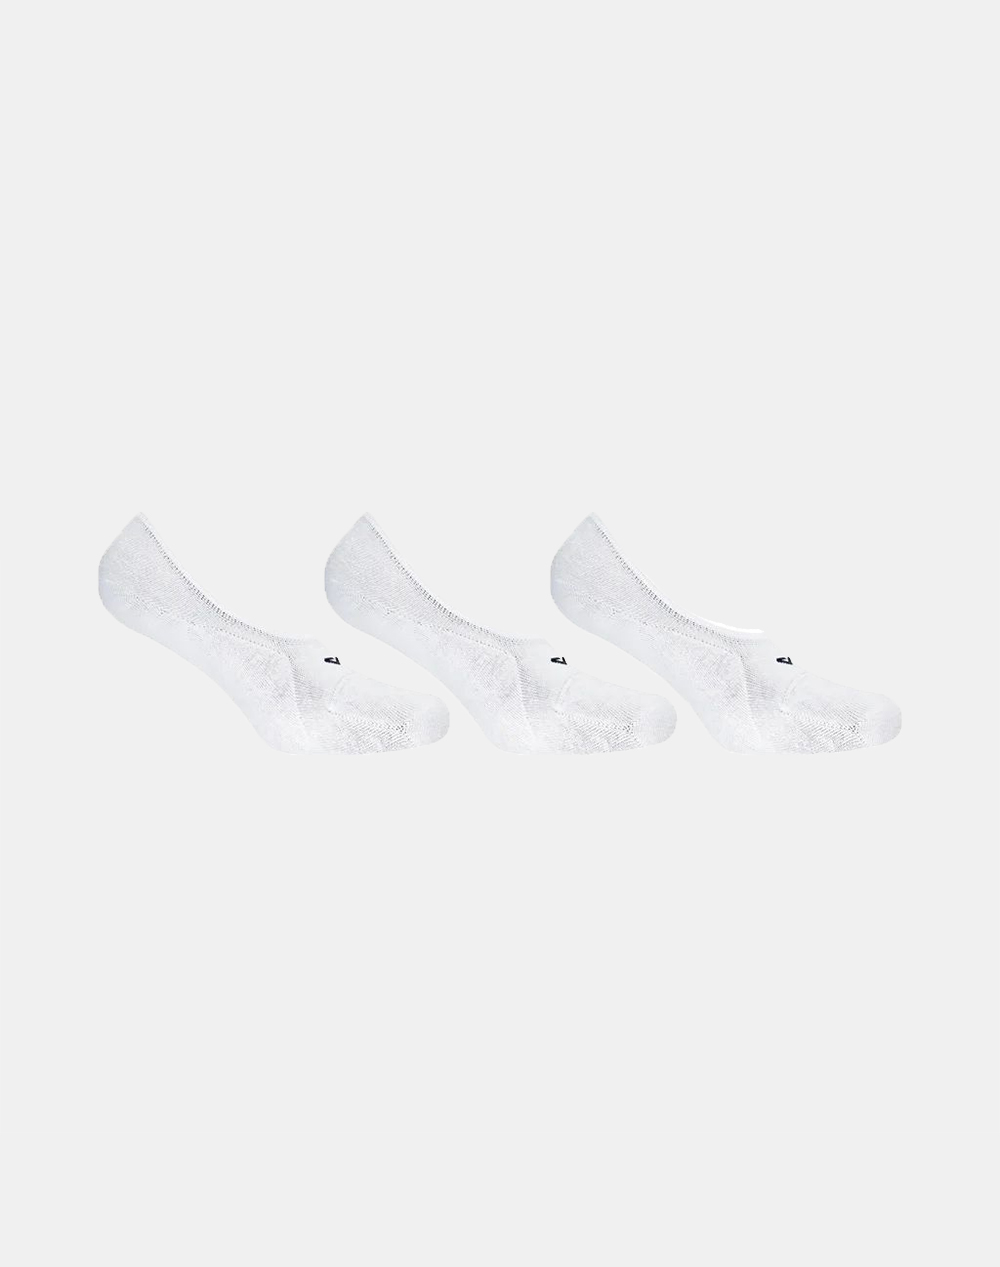 FILA F1252-3 Unisex Collection Ghost SOCK F1252-3-300 White